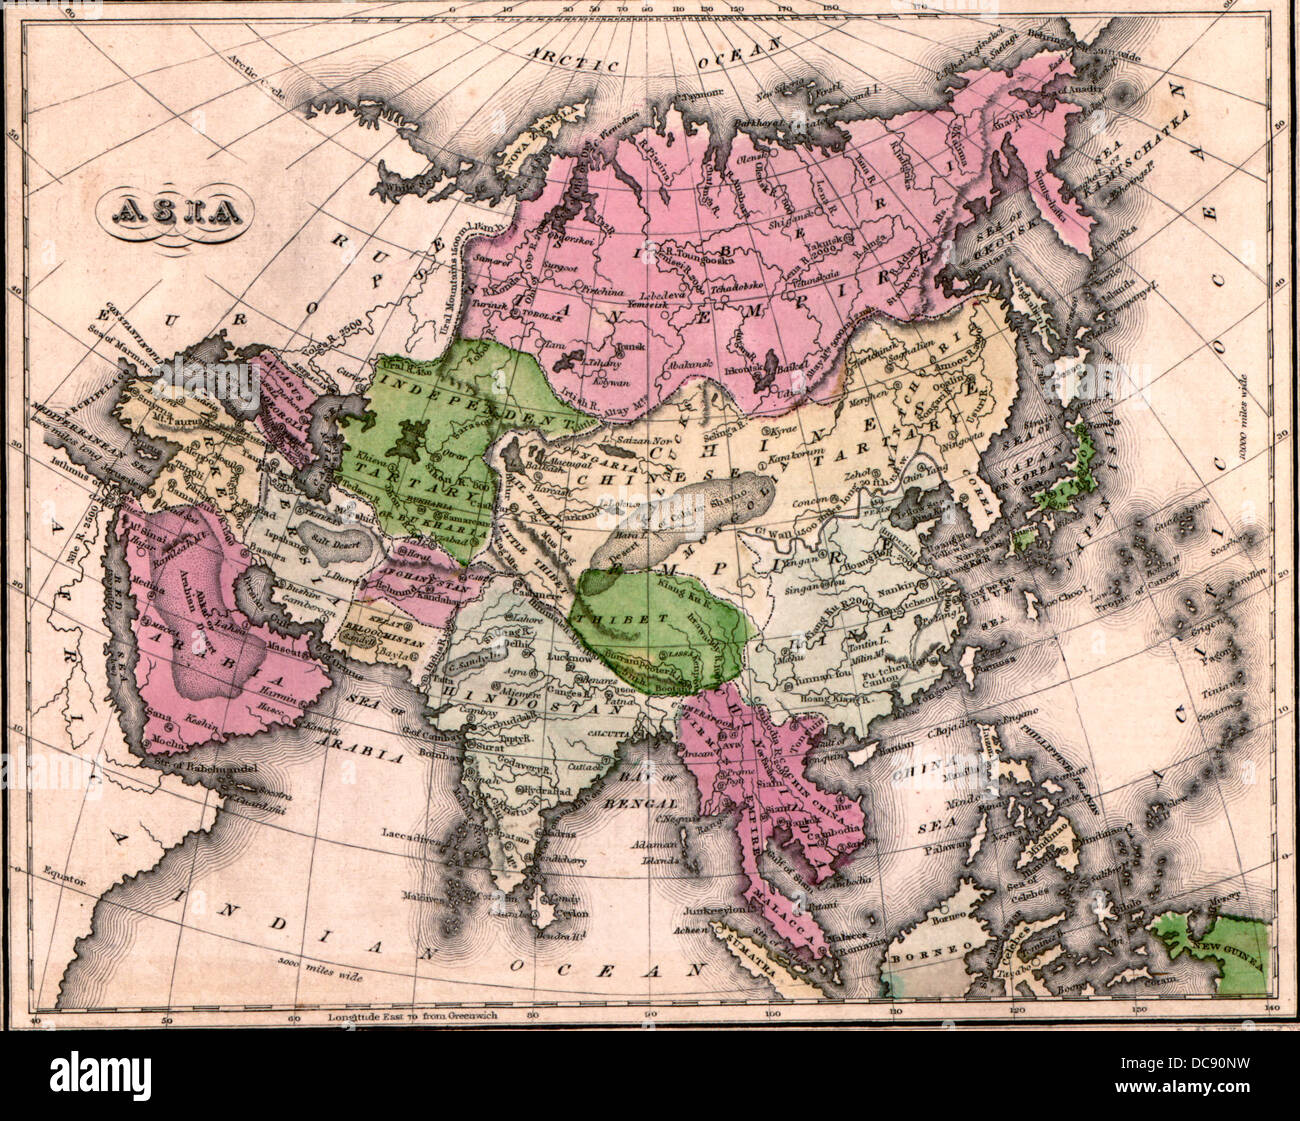 Map of Asia 1835 Stock Photo